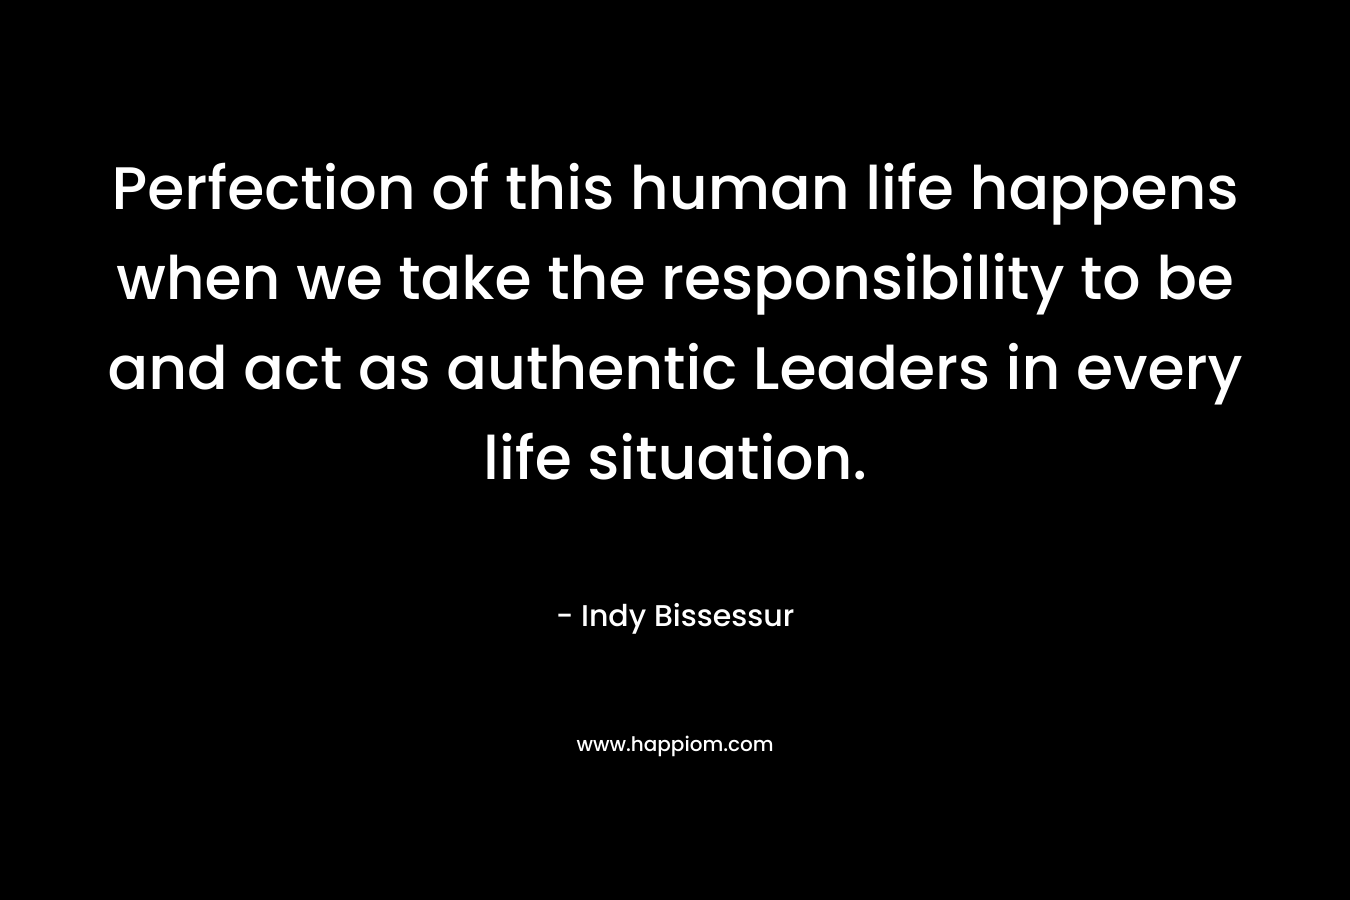 Perfection of this human life happens when we take the responsibility to be and act as authentic Leaders in every life situation. – Indy Bissessur